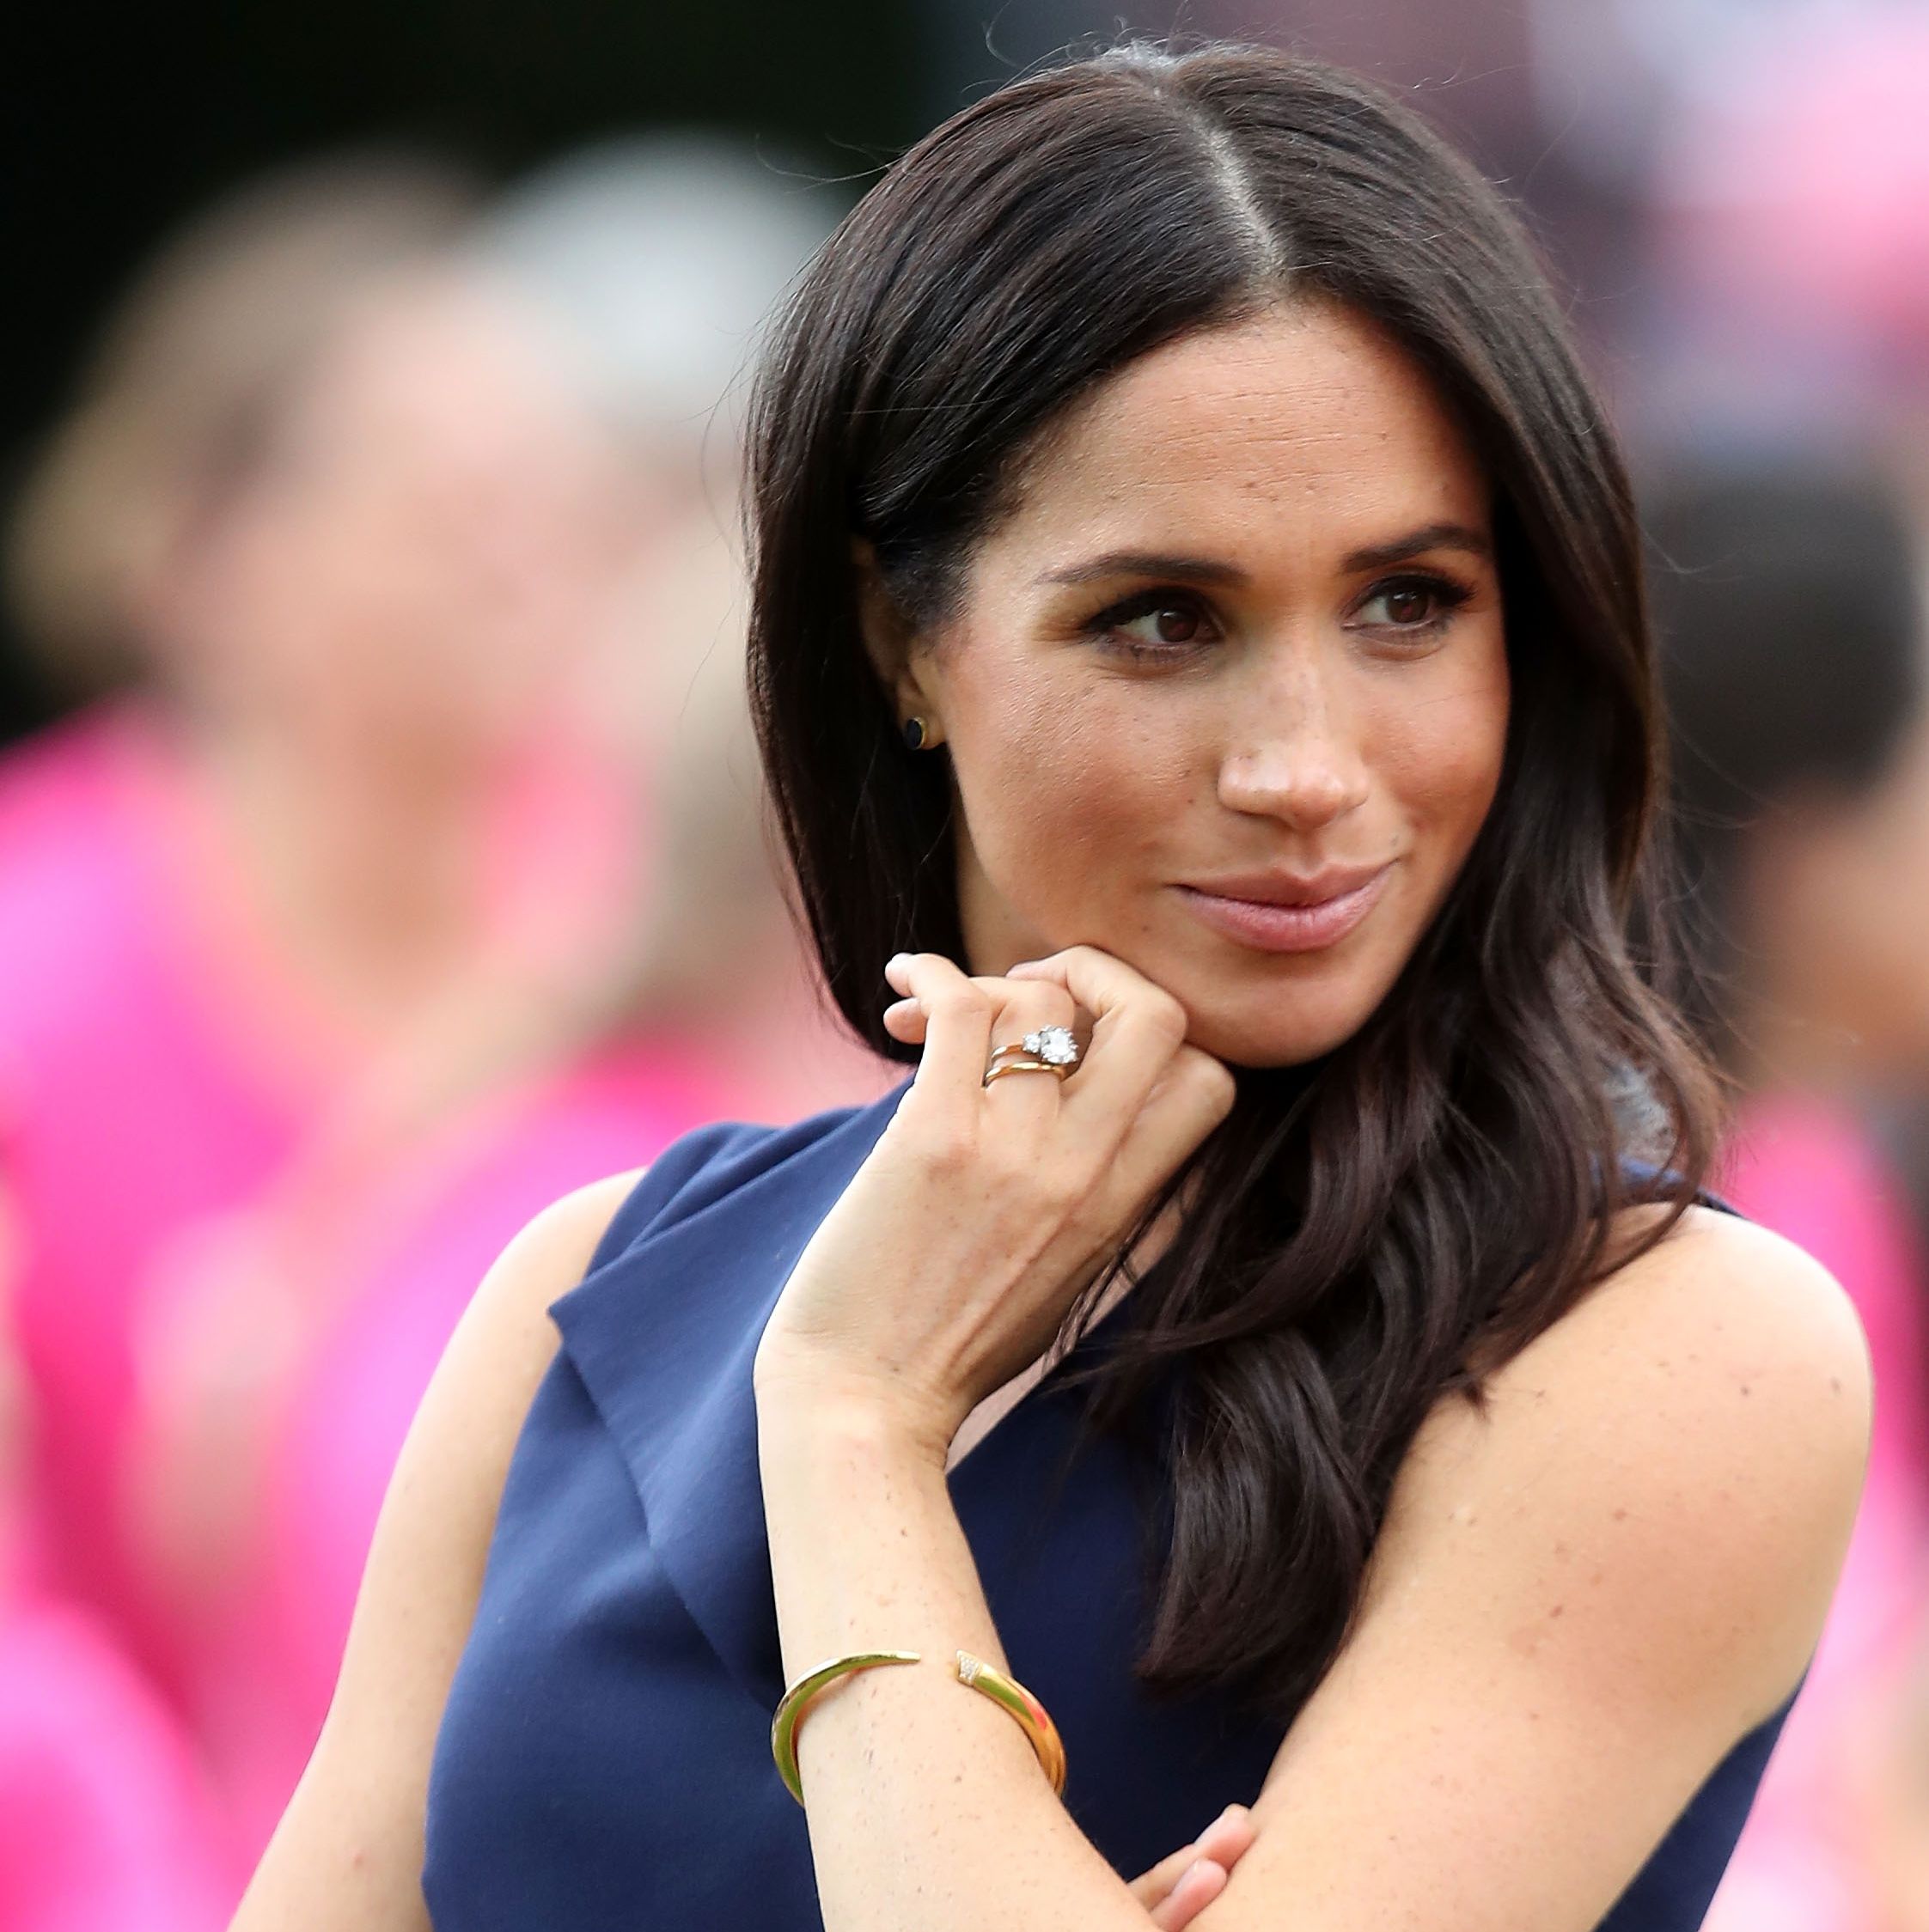 In a new essay, J.R. Moehringer reveals he lived with Meghan and Harry while working on the explosive memoir.